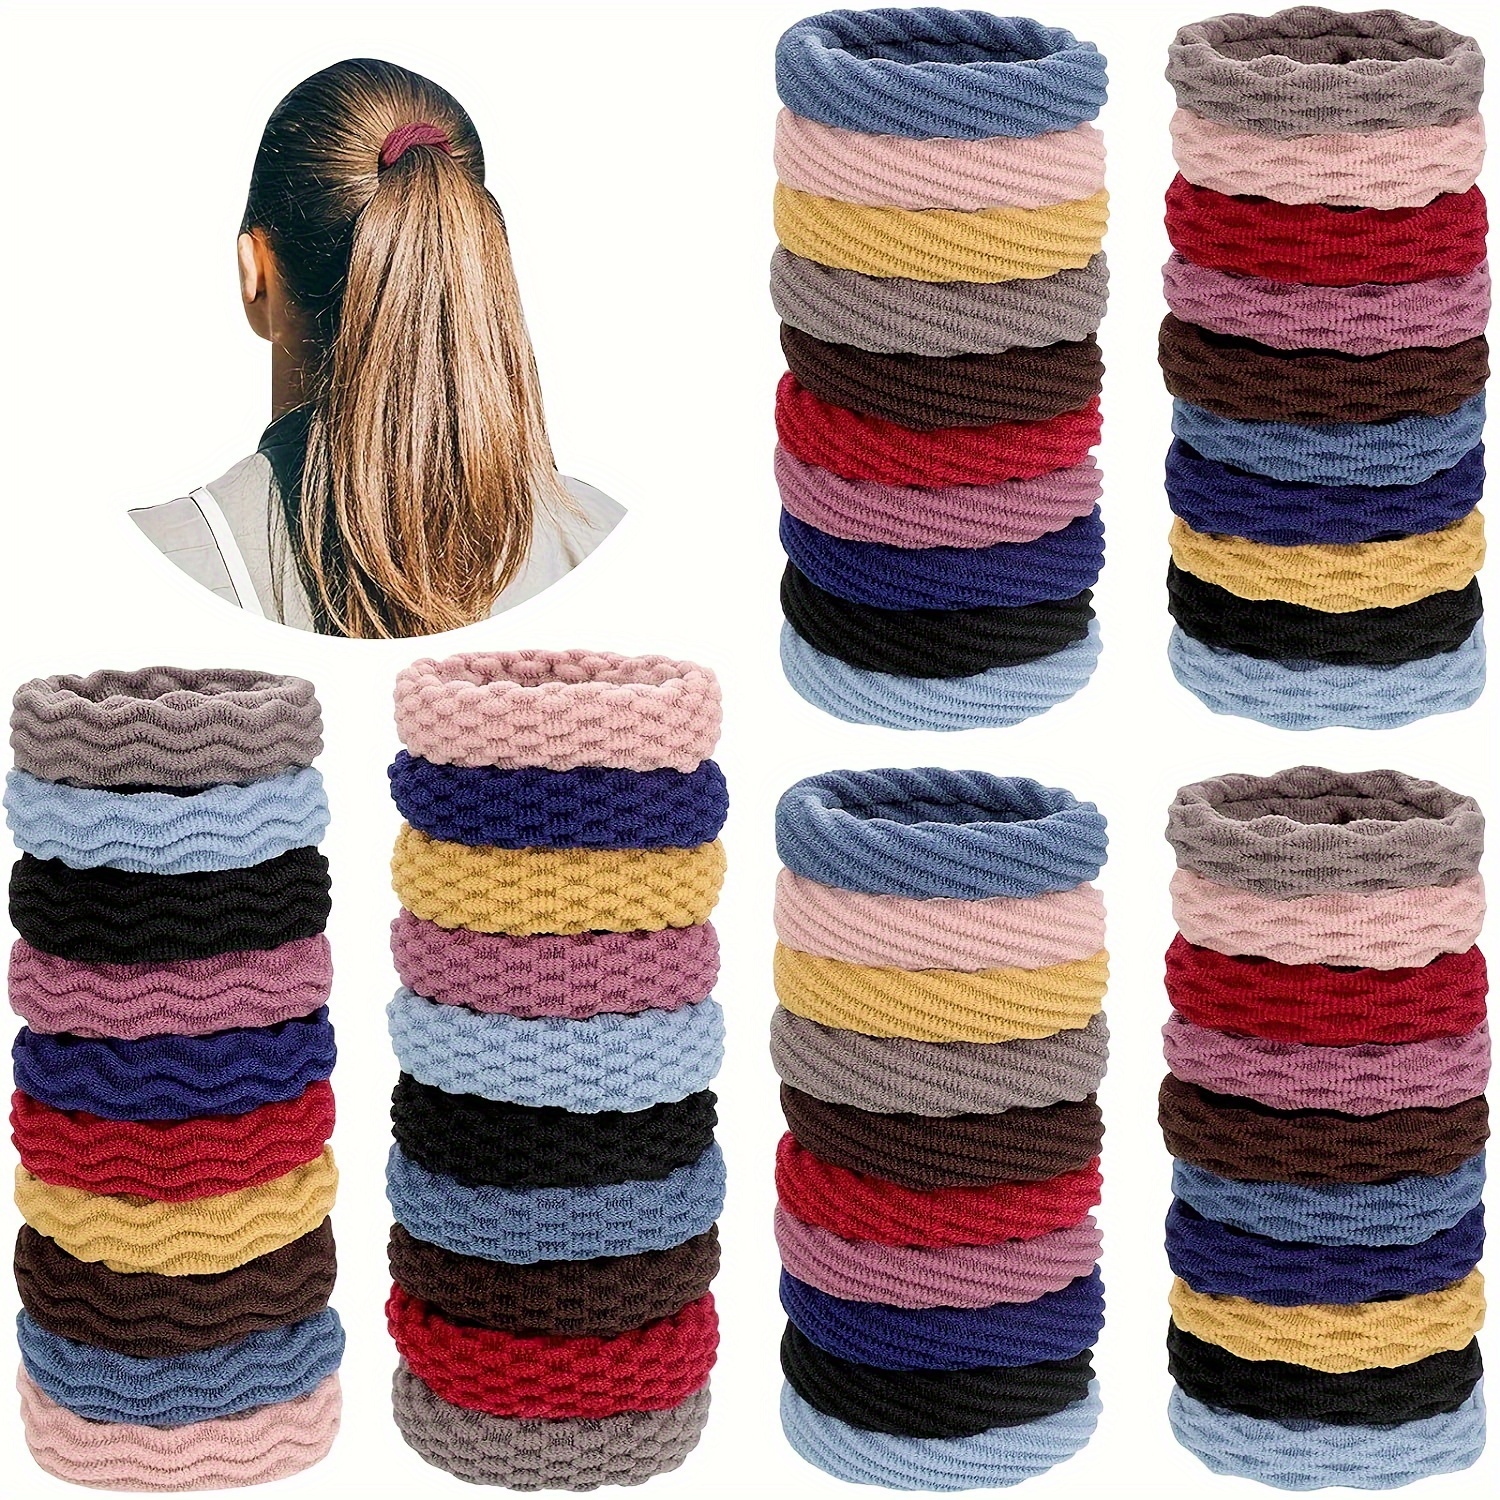 

60 Pcs Hair Ties, Non-slip And Seamless Hair Bands For Thick Heavy And Curly Hair, Lightweight Highly Elastic